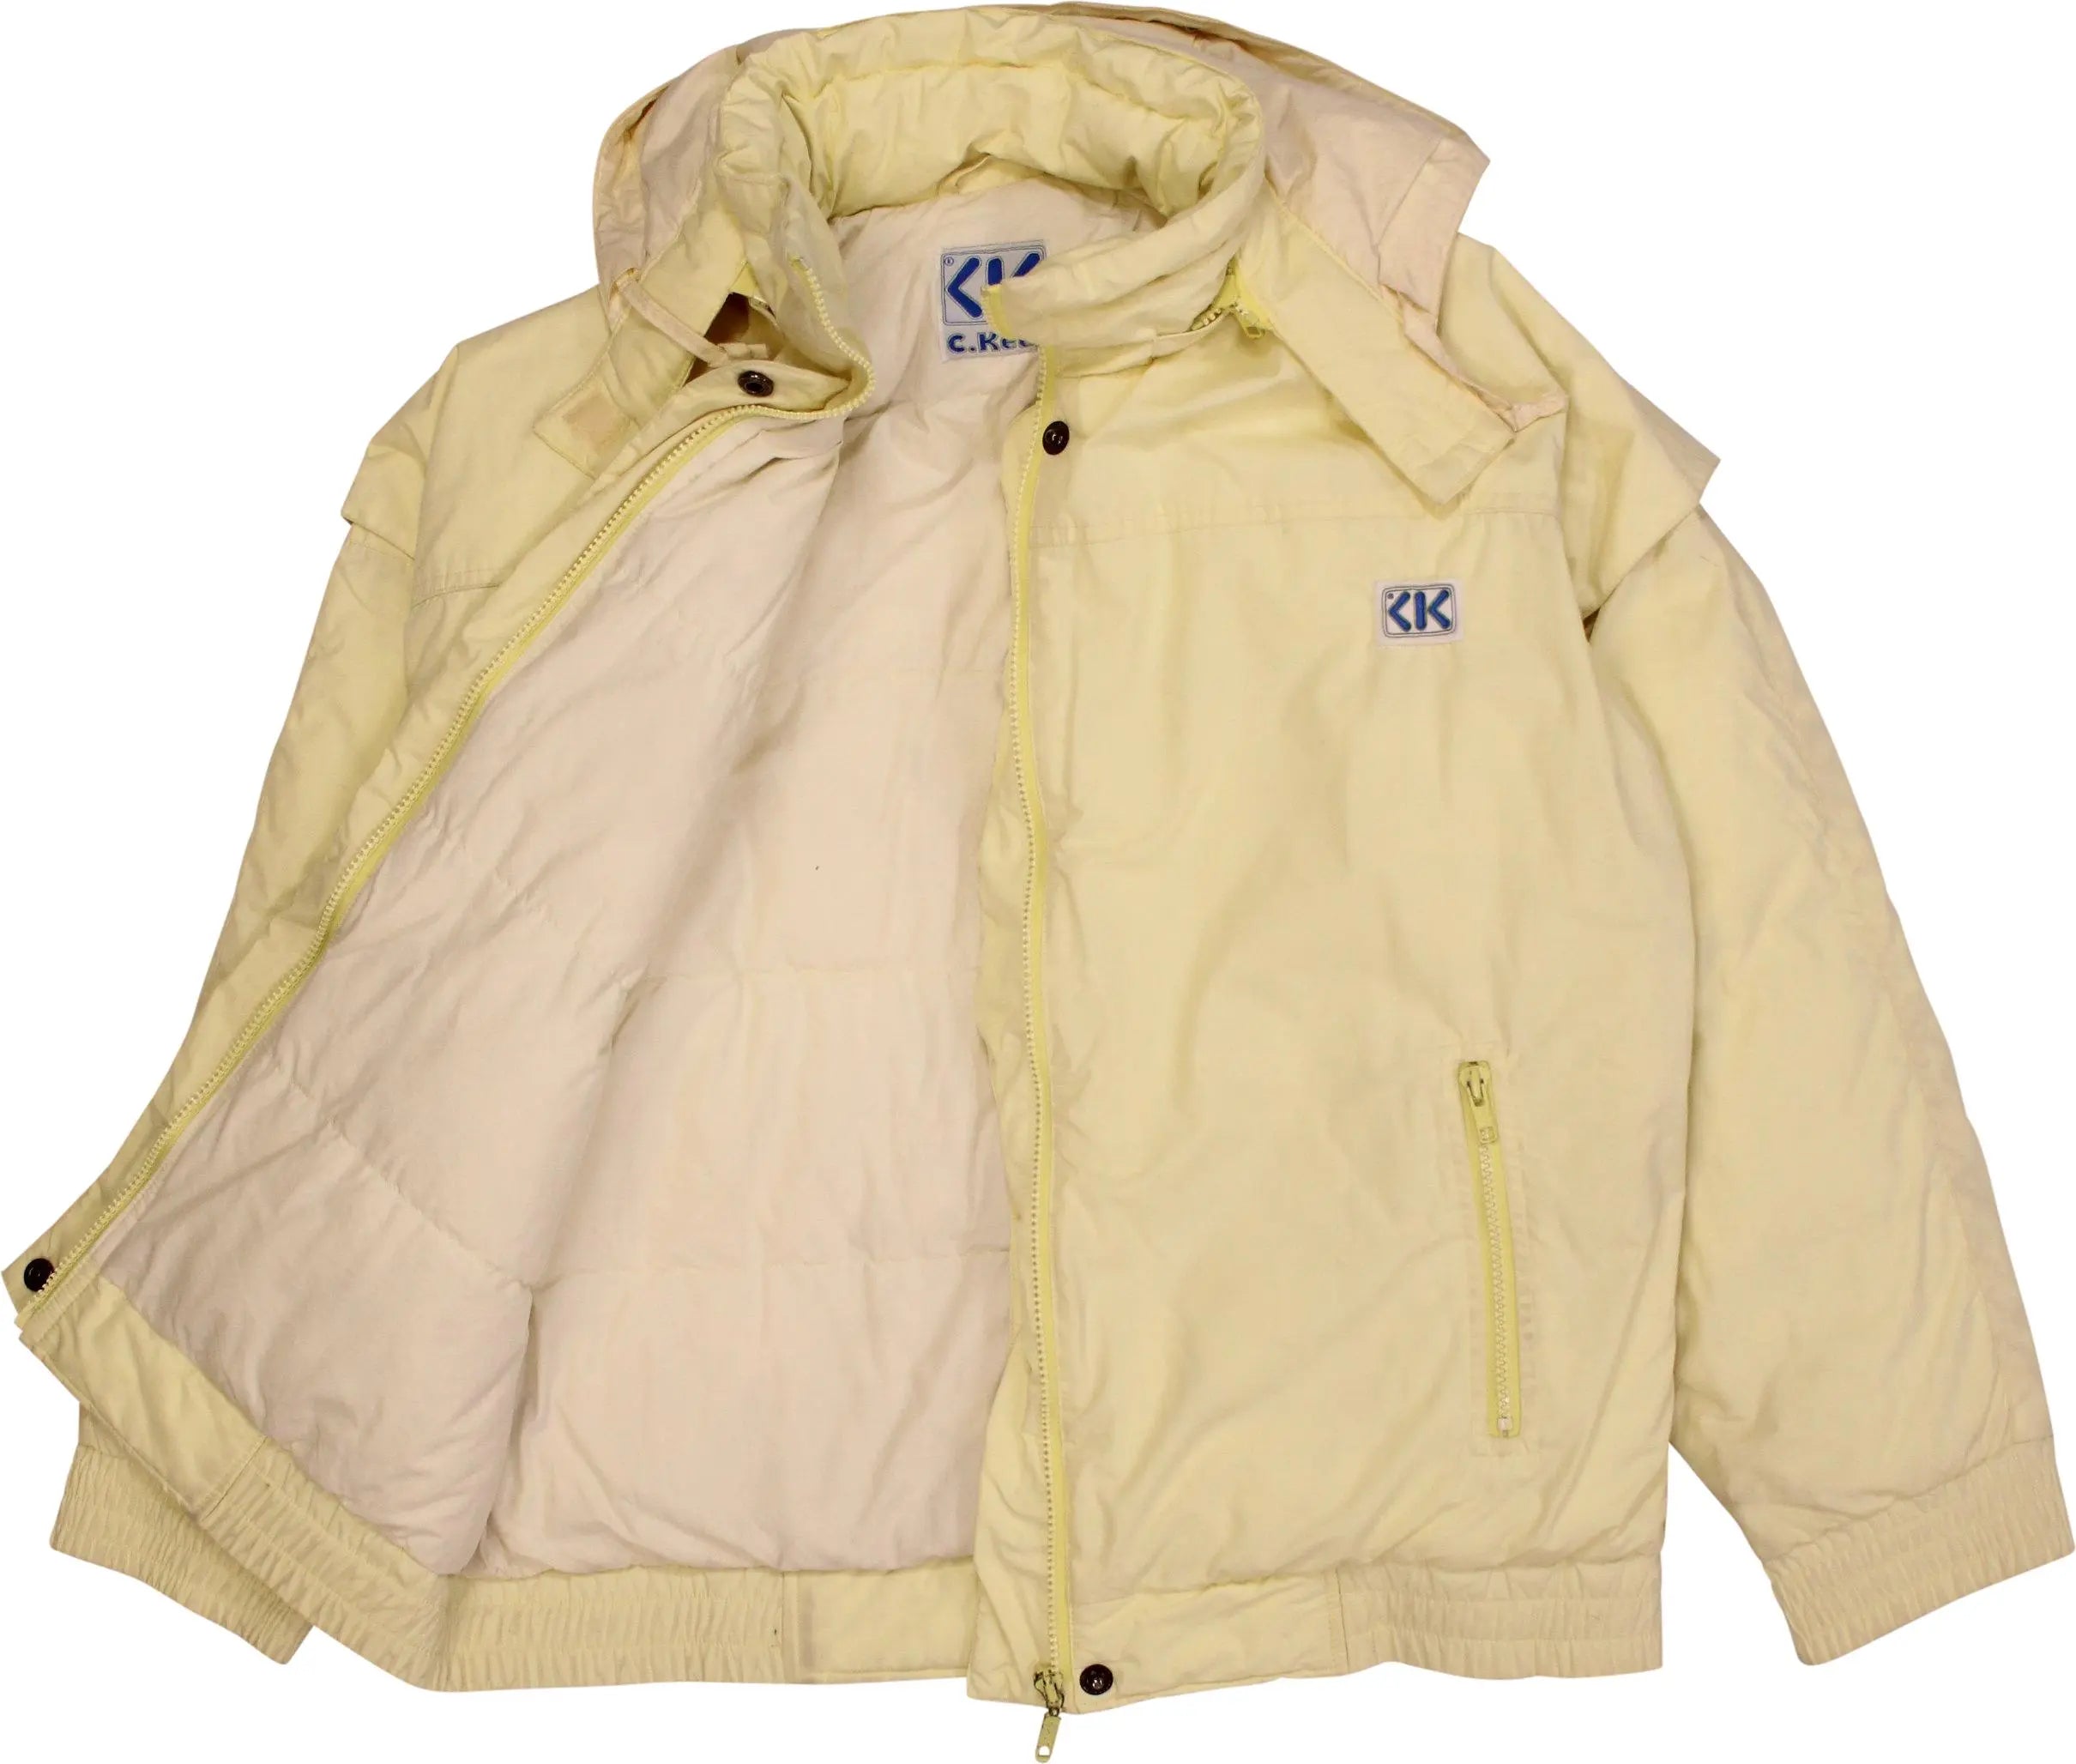 C.Keer - 80s/90s Puffer Jacket- ThriftTale.com - Vintage and second handclothing